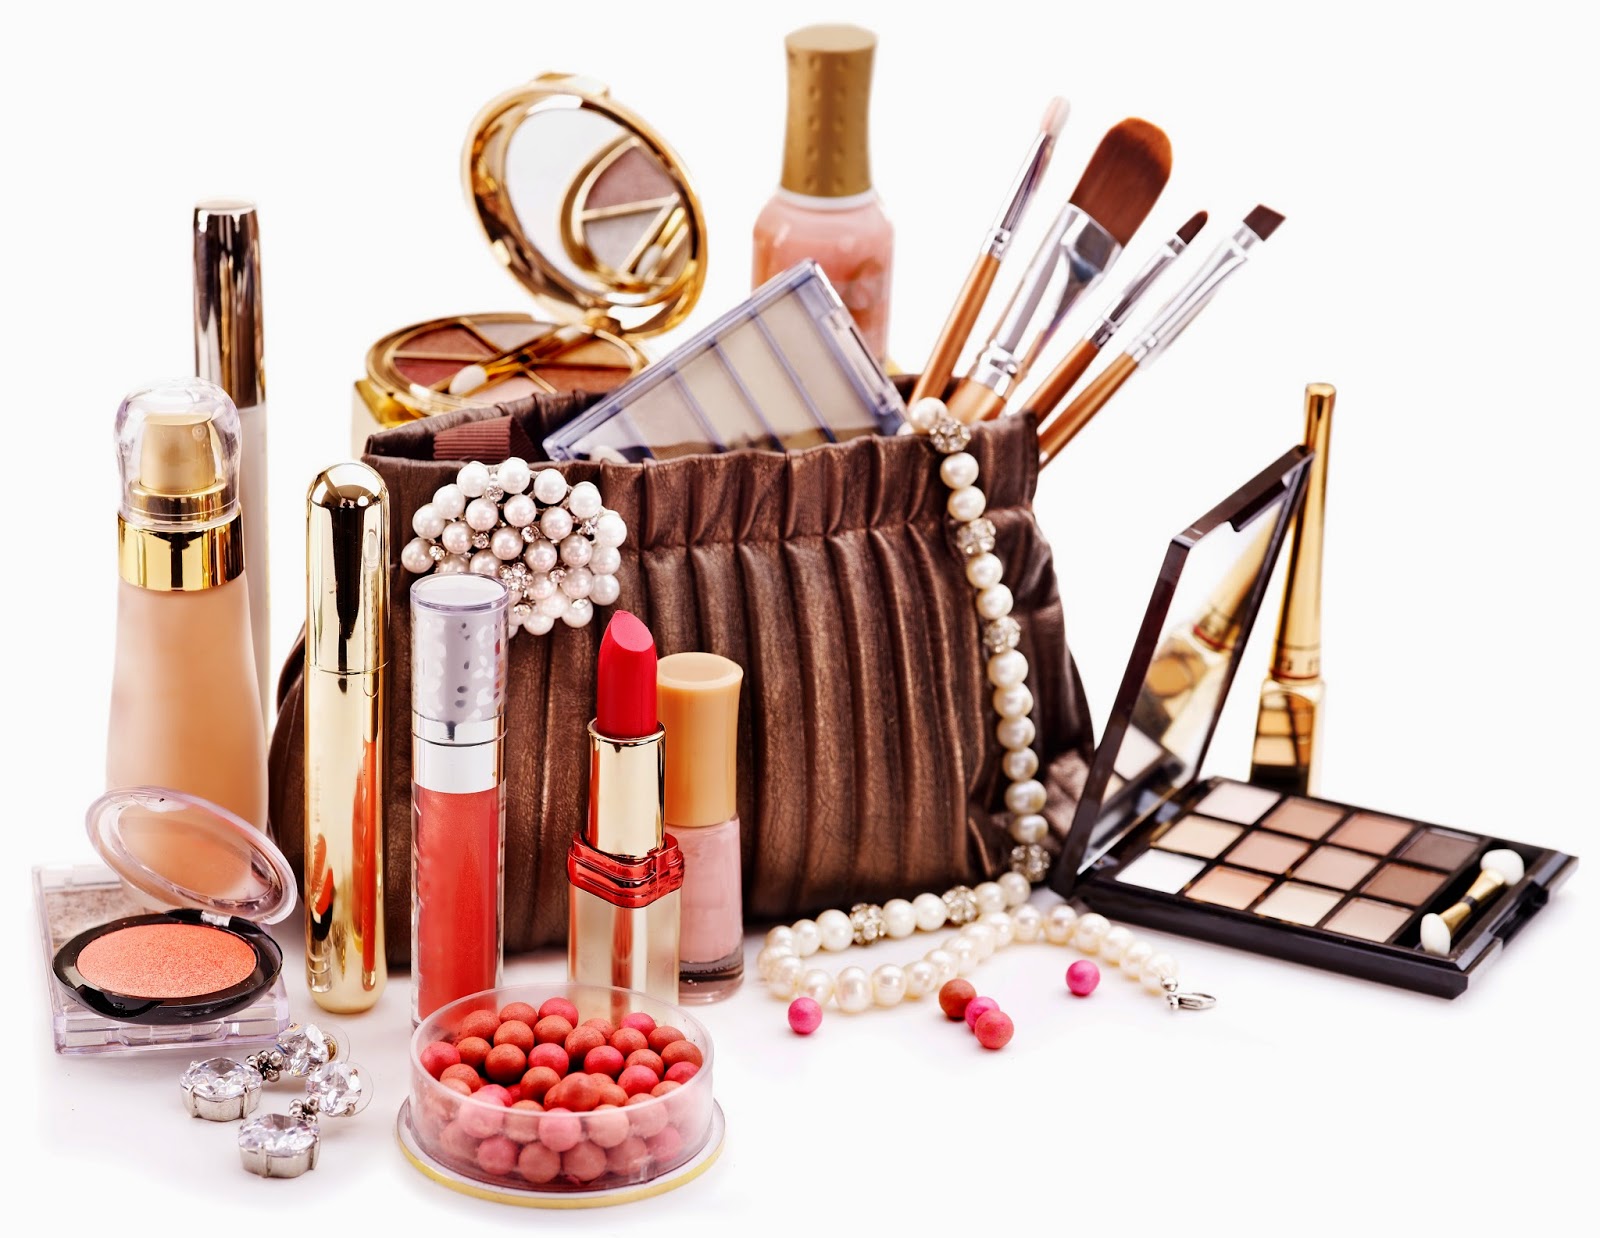 Top Players in the India Beauty and Personal Care Market